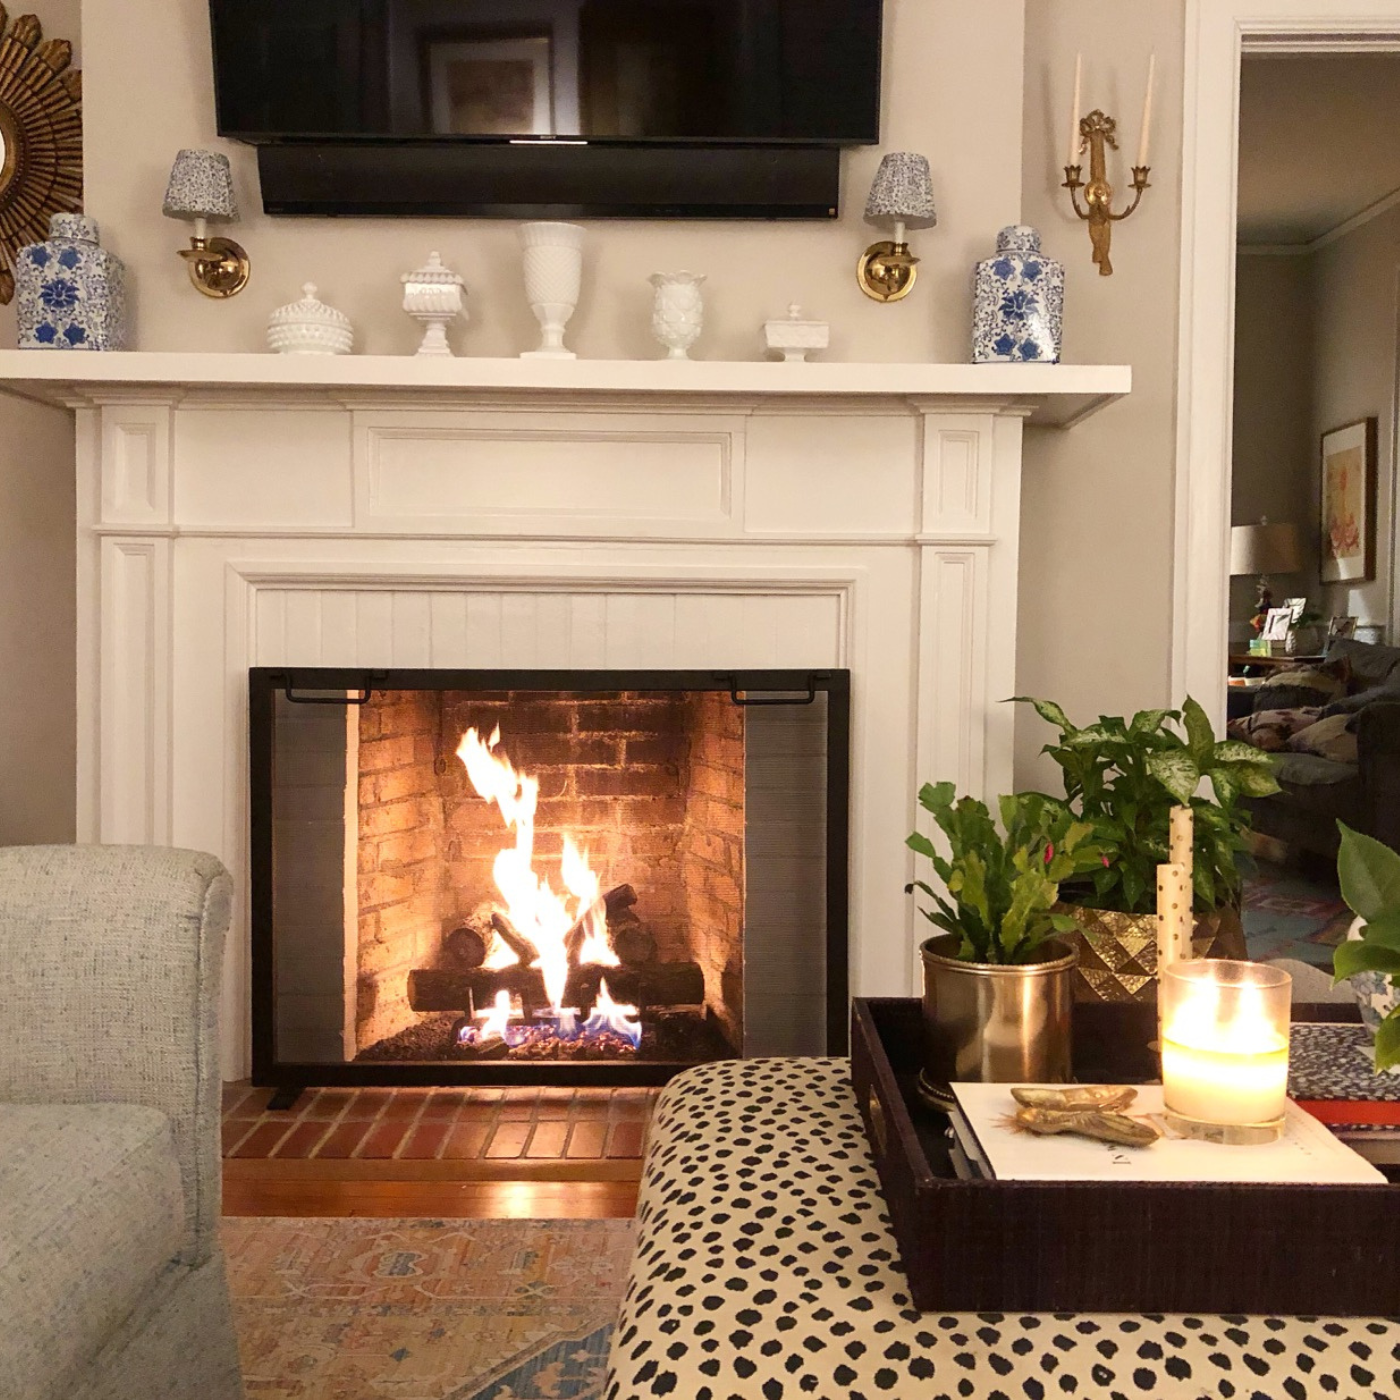 Photo of a living room designed by Cameron. A gray couch is seen partially on the lefthand side of the photo with a roaring fireplace as the focal point. The fireplace has a white mantel with matching blue-and-white vases at either end and small white vases and containers in the middle. Small blue-and-white lamps are above the mantel with a large television screen between them. A white ottoman with black dots is in the right foreground, with plants and a lit candle on it. Another room with a couch is connected to the living room and visible on the righthand side of the photo.